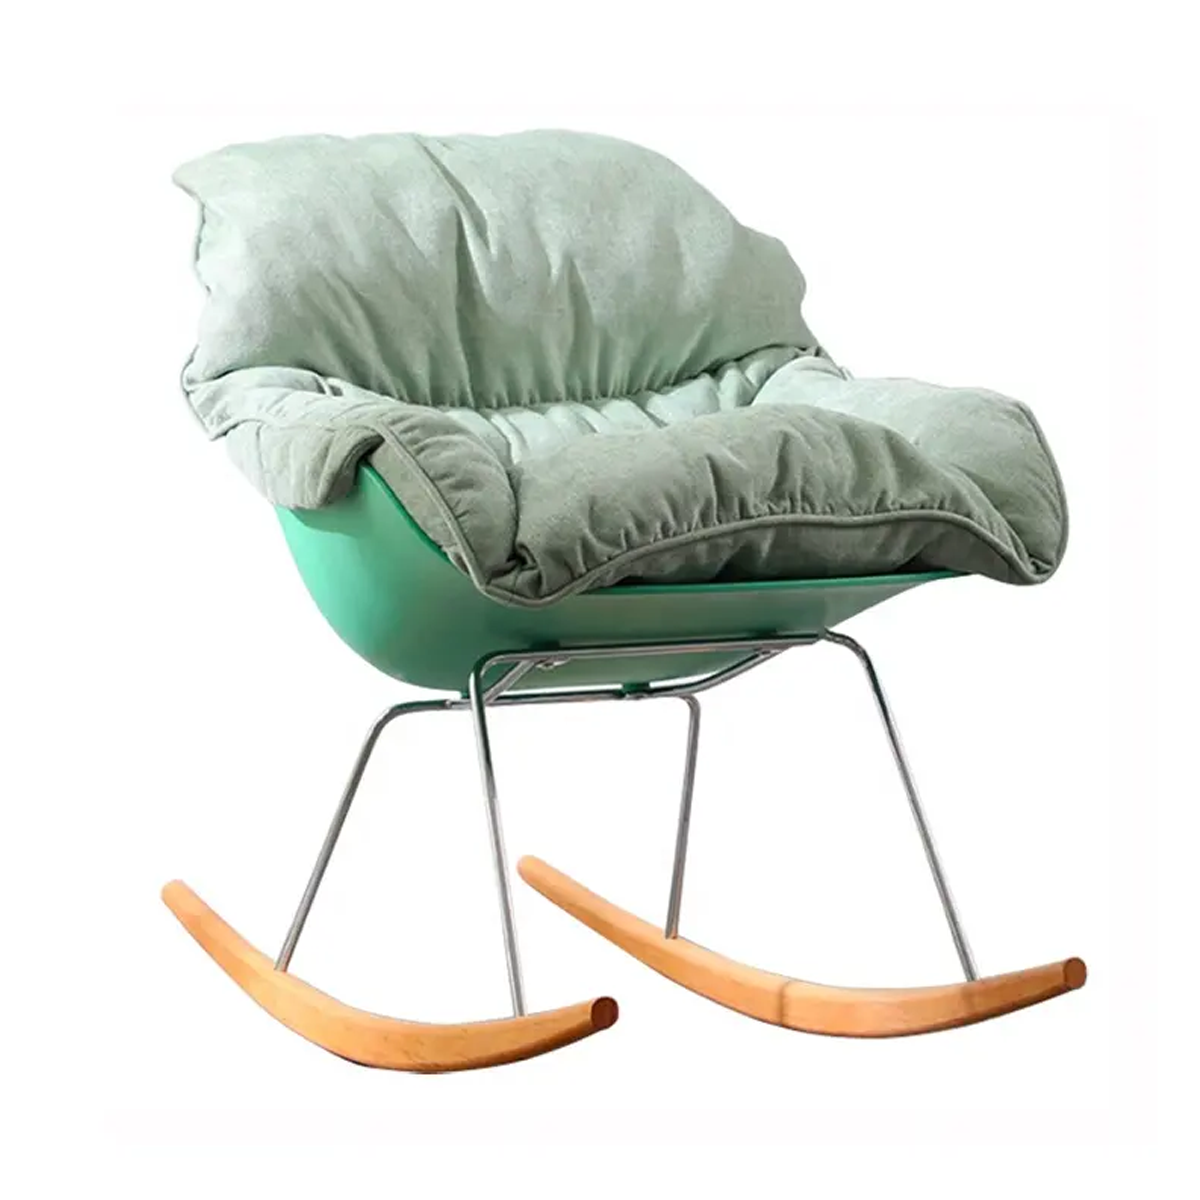 Modern Nordic Rocking Swing Chair with Fabric Cushion by DAAMUDI'S - Sage Green